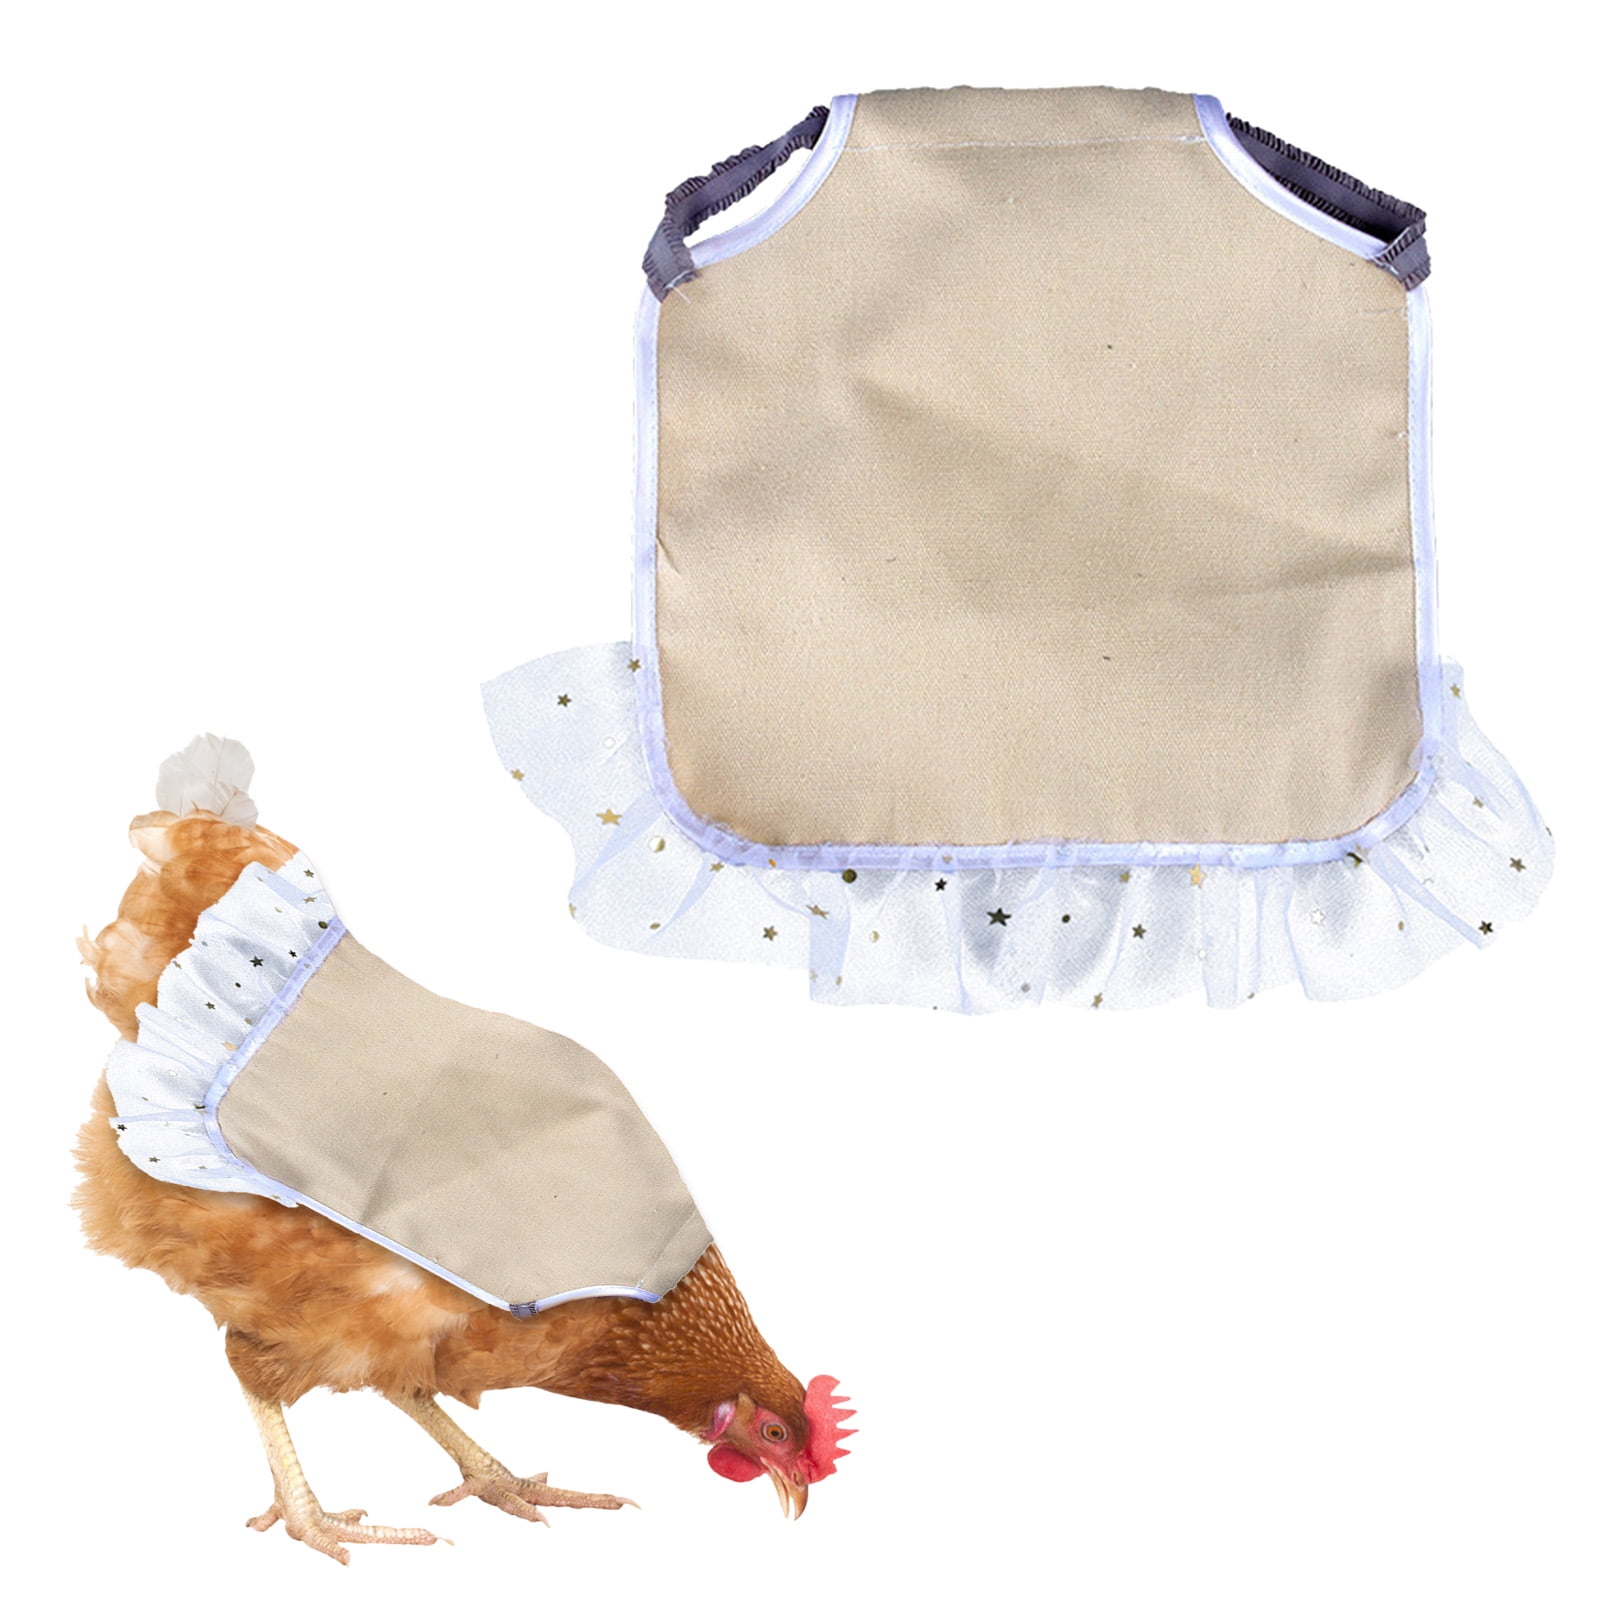 1 WIDE  w WING Chicken Saddle Apron Hen BACK FEATHER PROTECTION BACKYARD POULTRY 